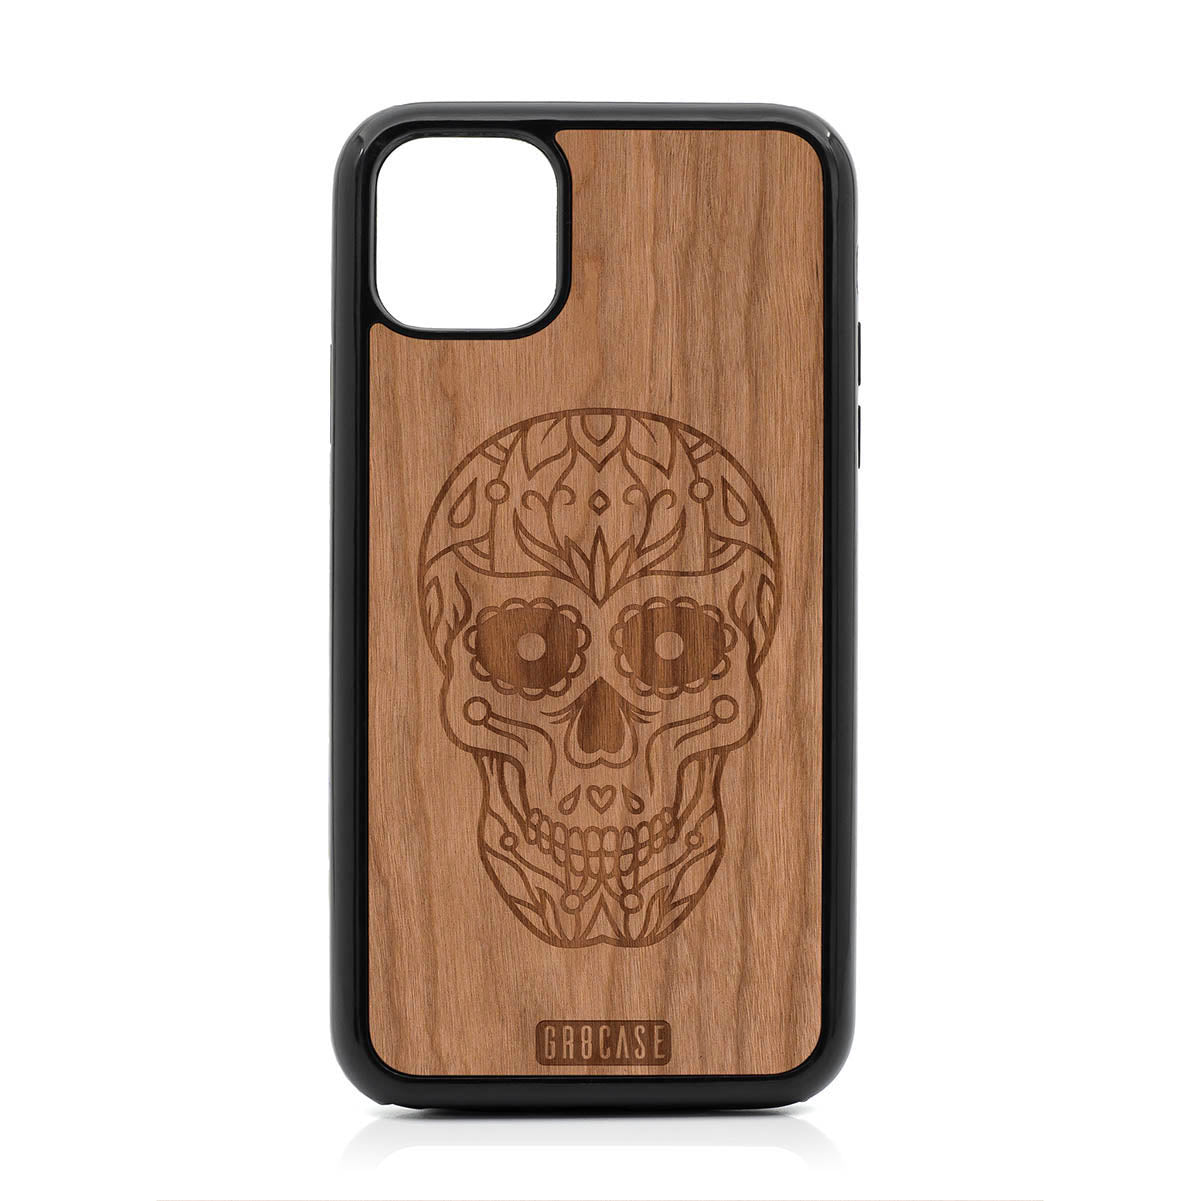 Sugar Skull Design Wood Case For iPhone 11 Pro Max by GR8CASE